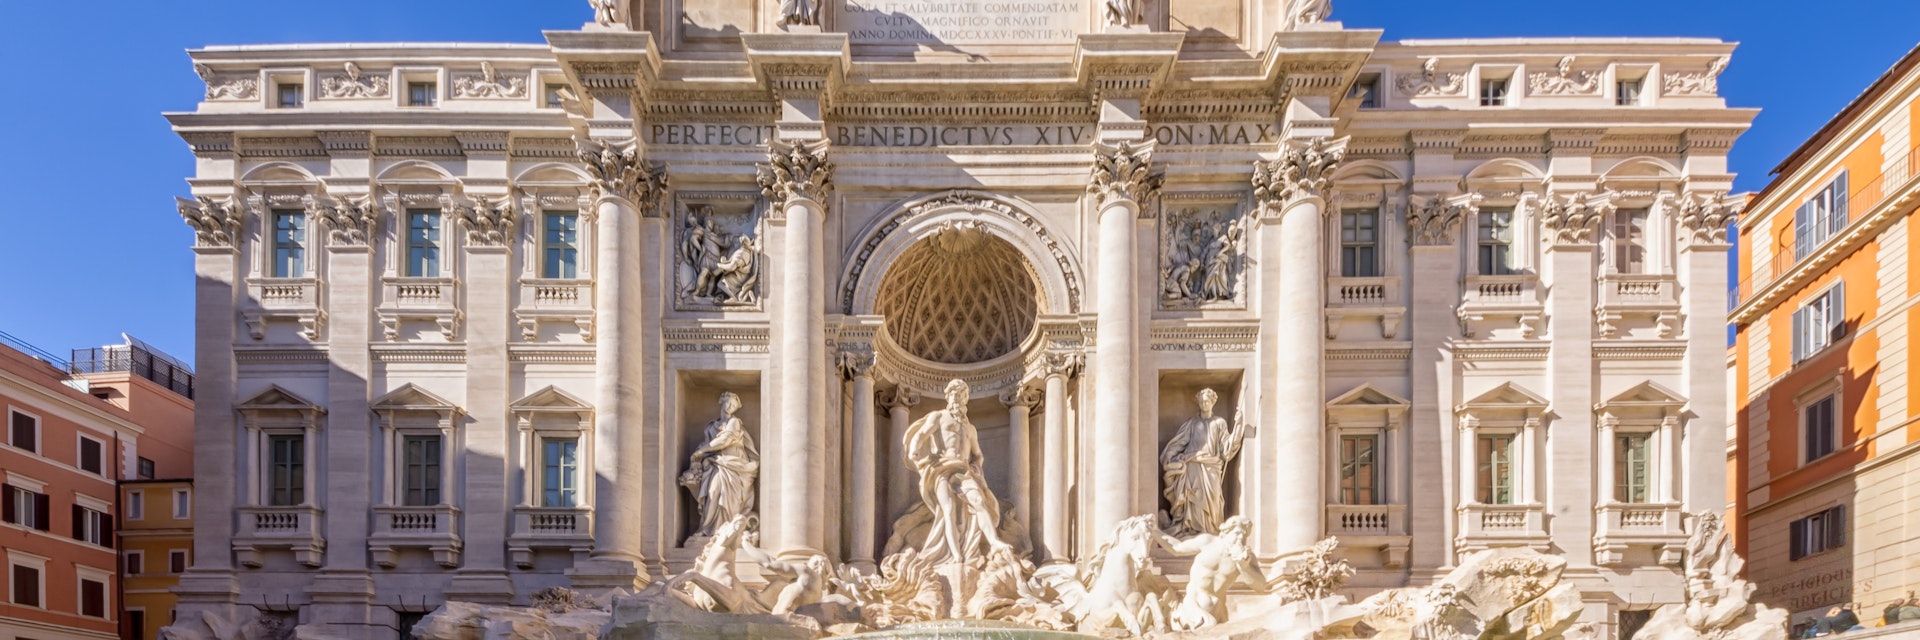 Famous iconic Trevi Fountain at Piazza Di Trevi
1196531914